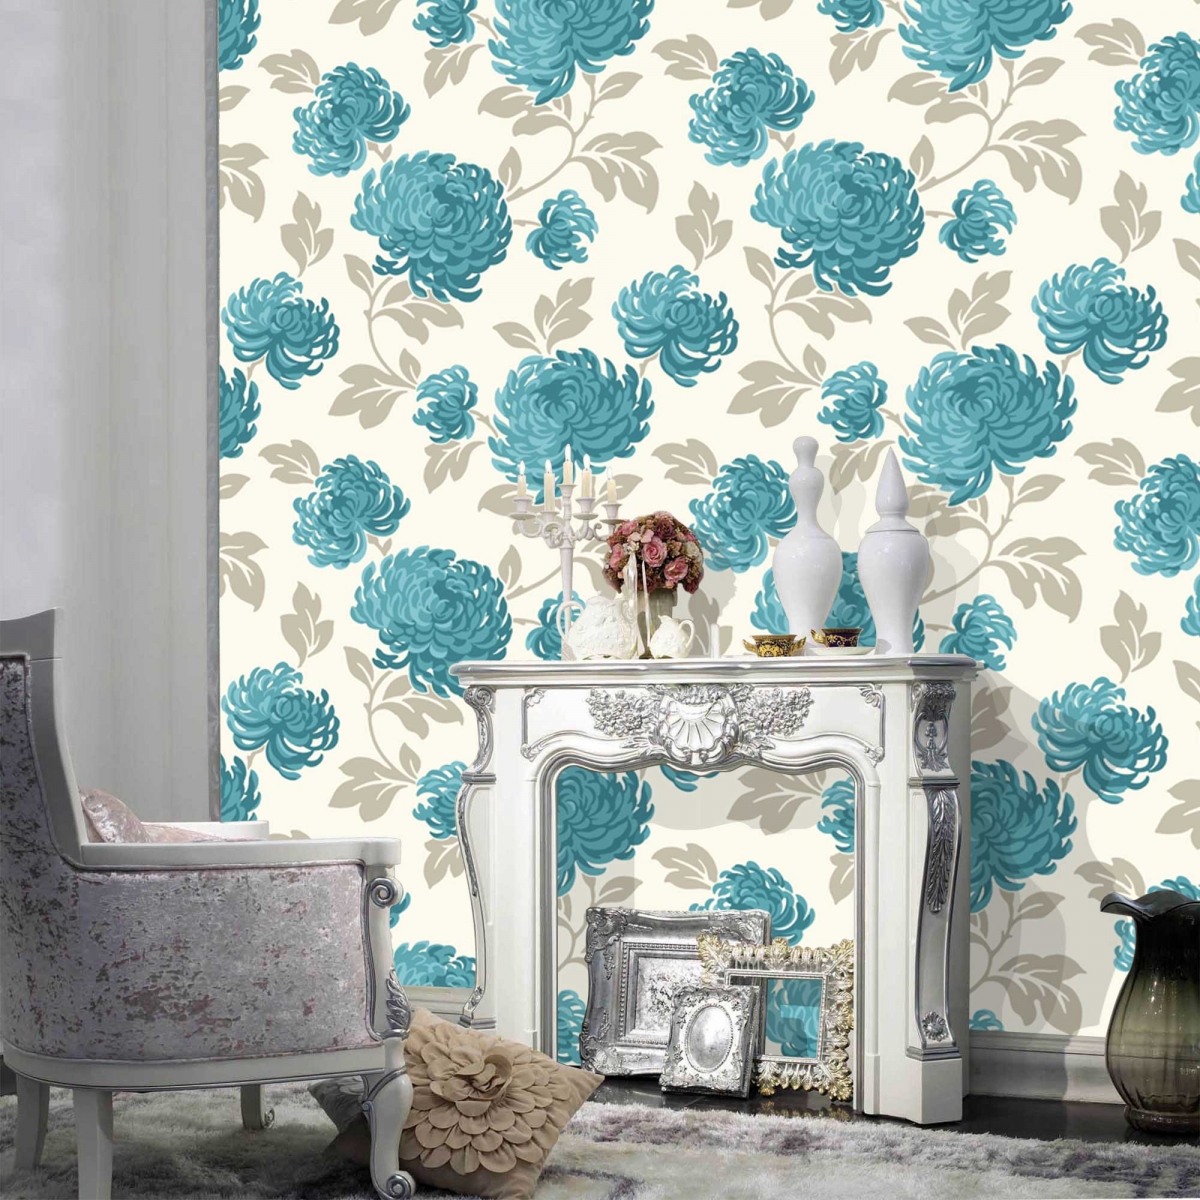 Teal and White Bloom Floral Wallpaper